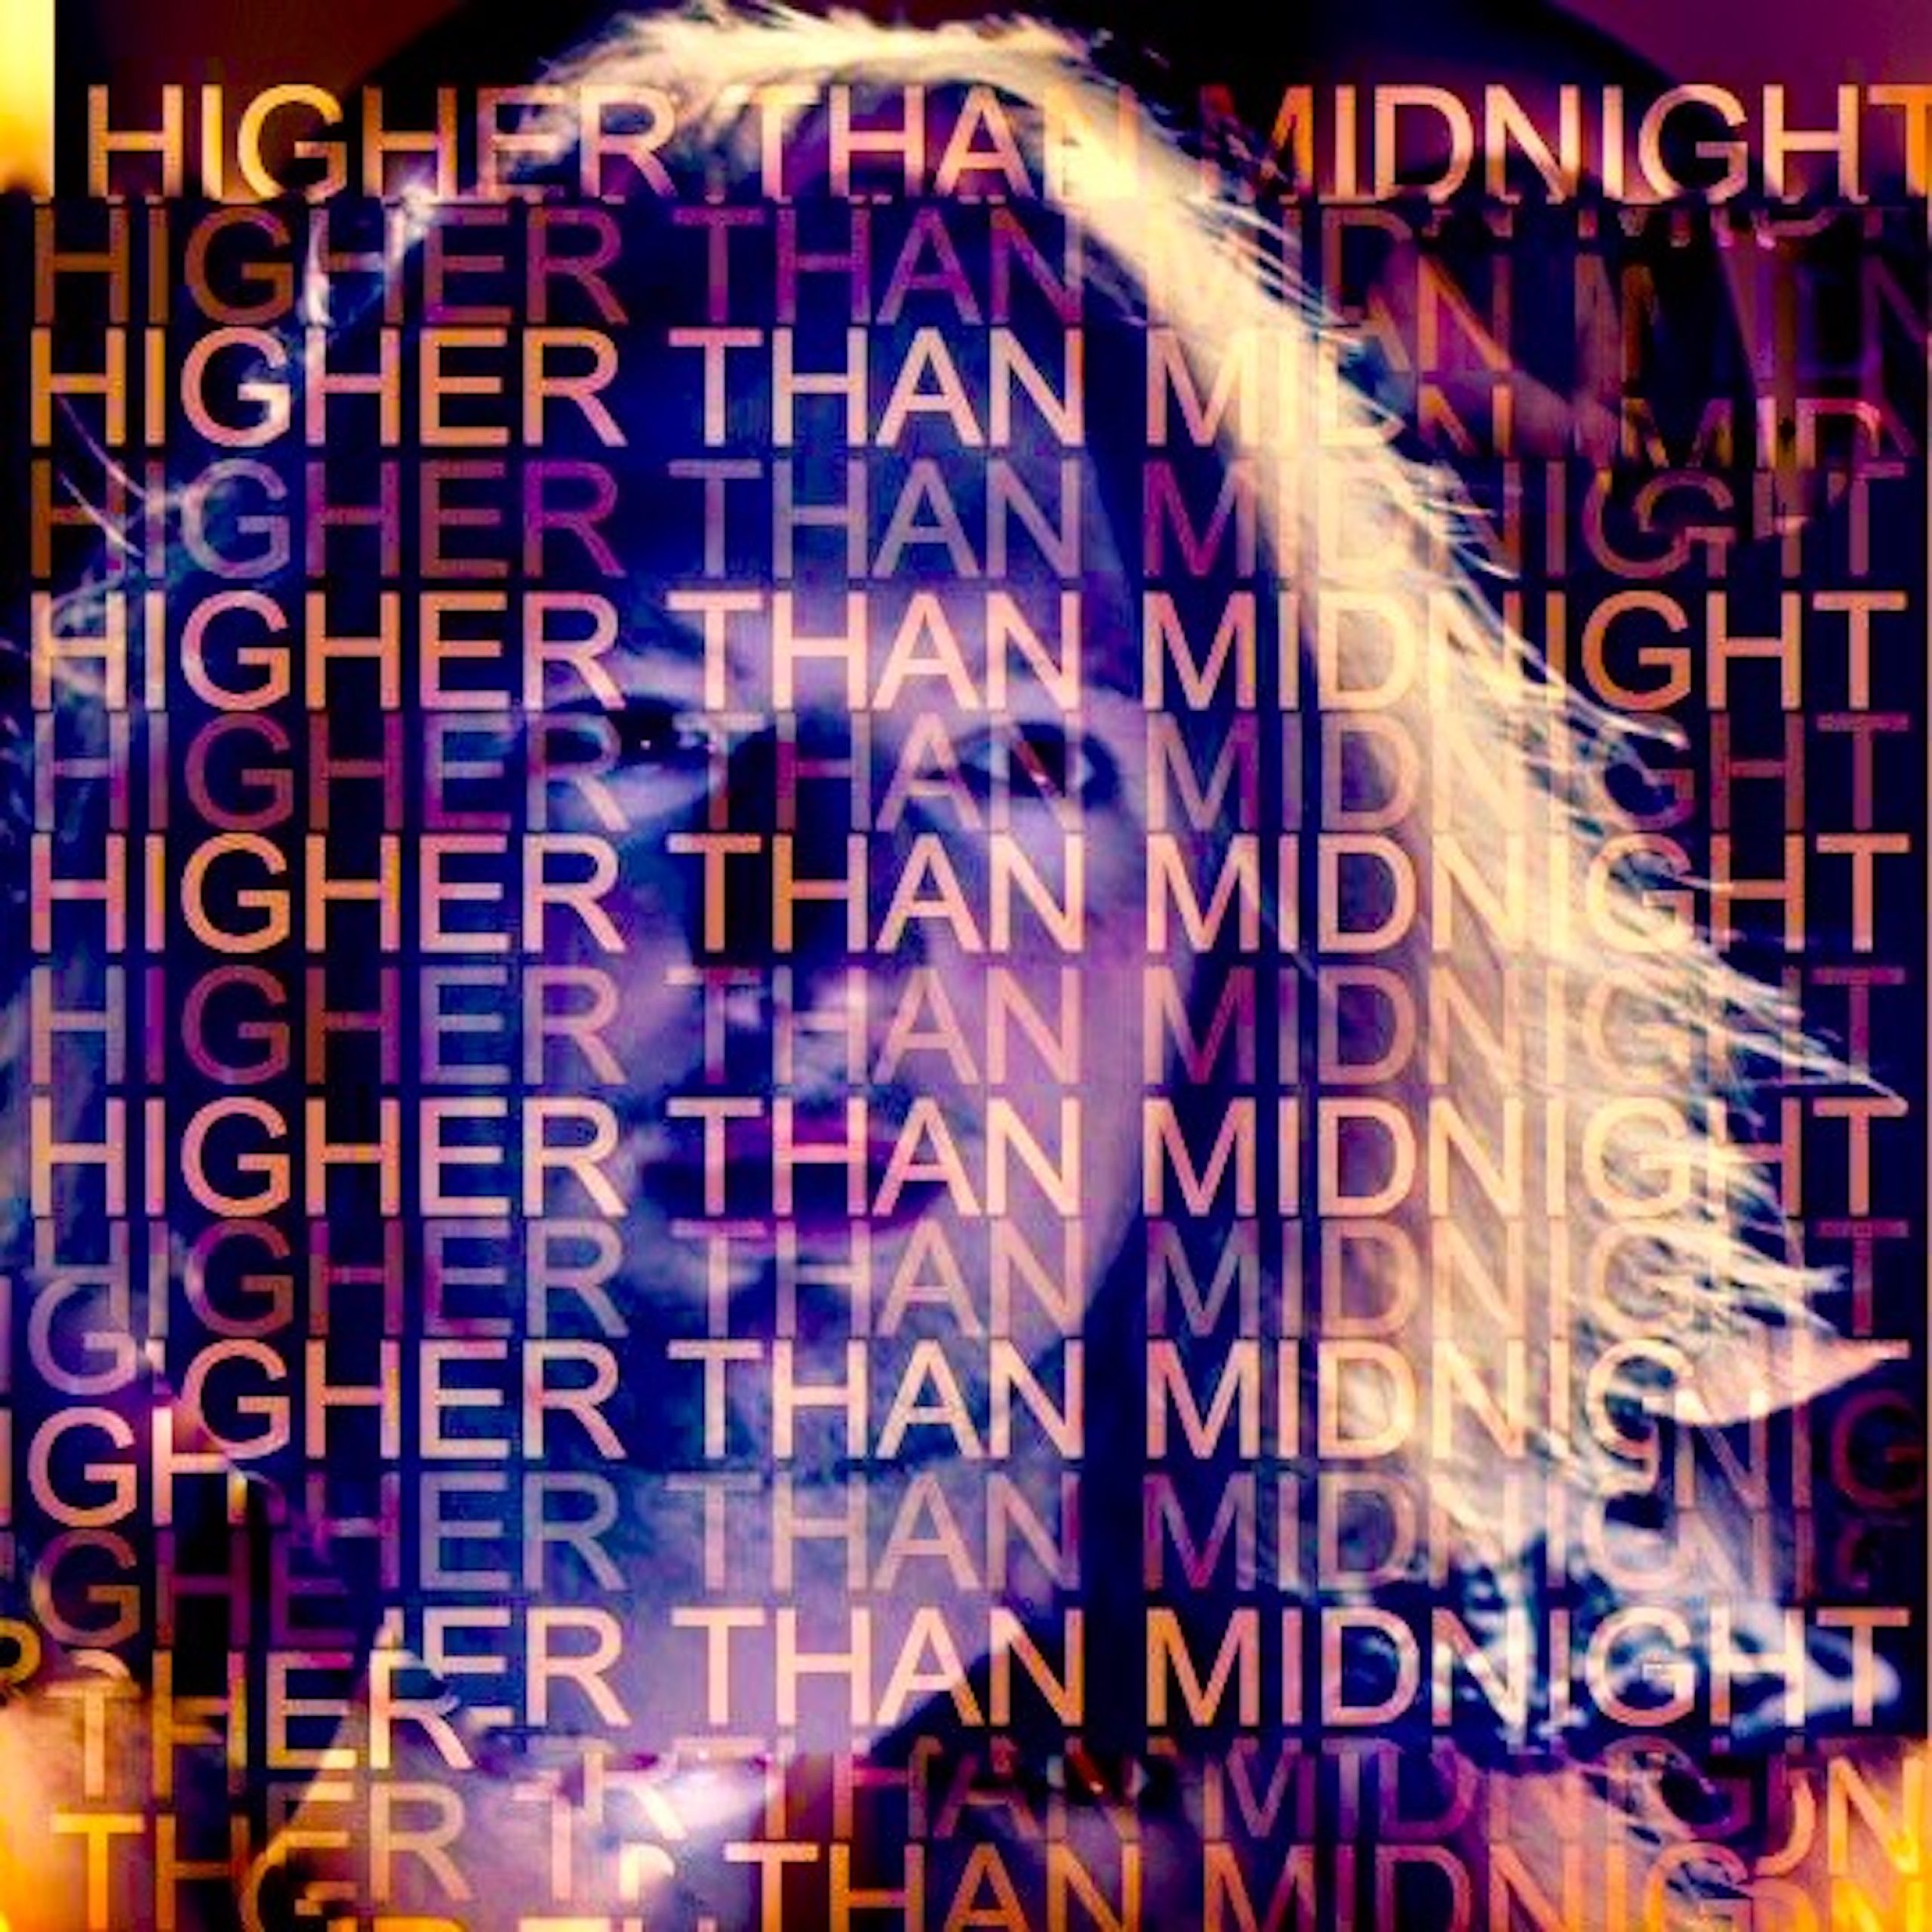 **PREMIERE** Listen To Barney Goodall’s Brand New Track – Higher than Midnight **HERE**